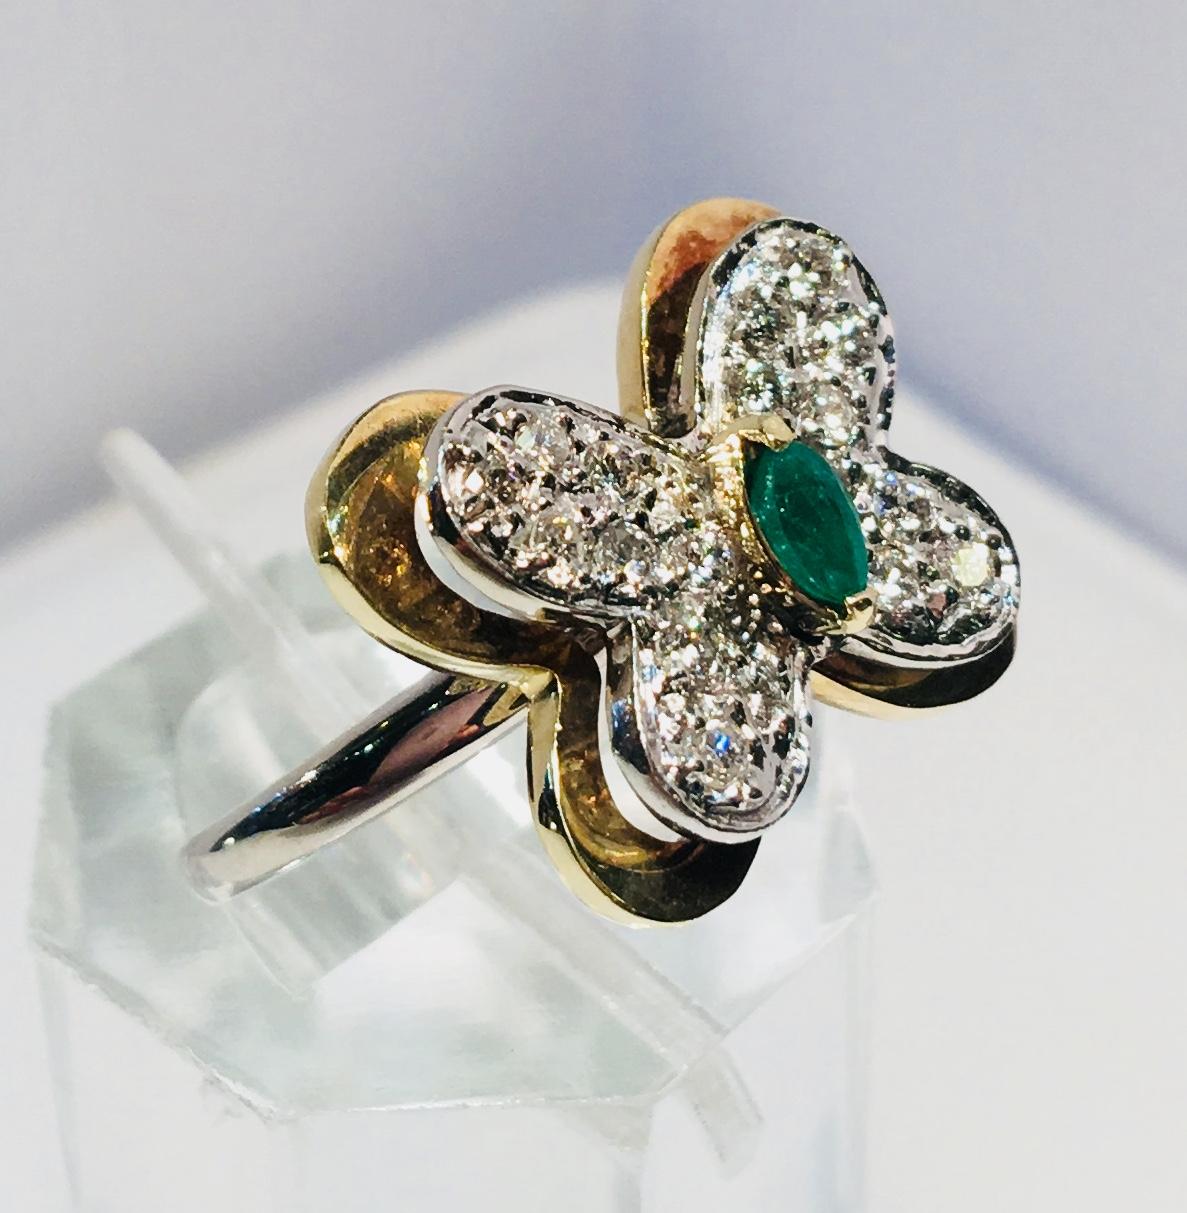 Sweet estate butterfly ring features a prong set, marquise cut green emerald body and pave set diamond wings.  The face of the ring is 14 karat white gold, with a separate, larger yellow gold butterfly outline underneath the face., creating a 3